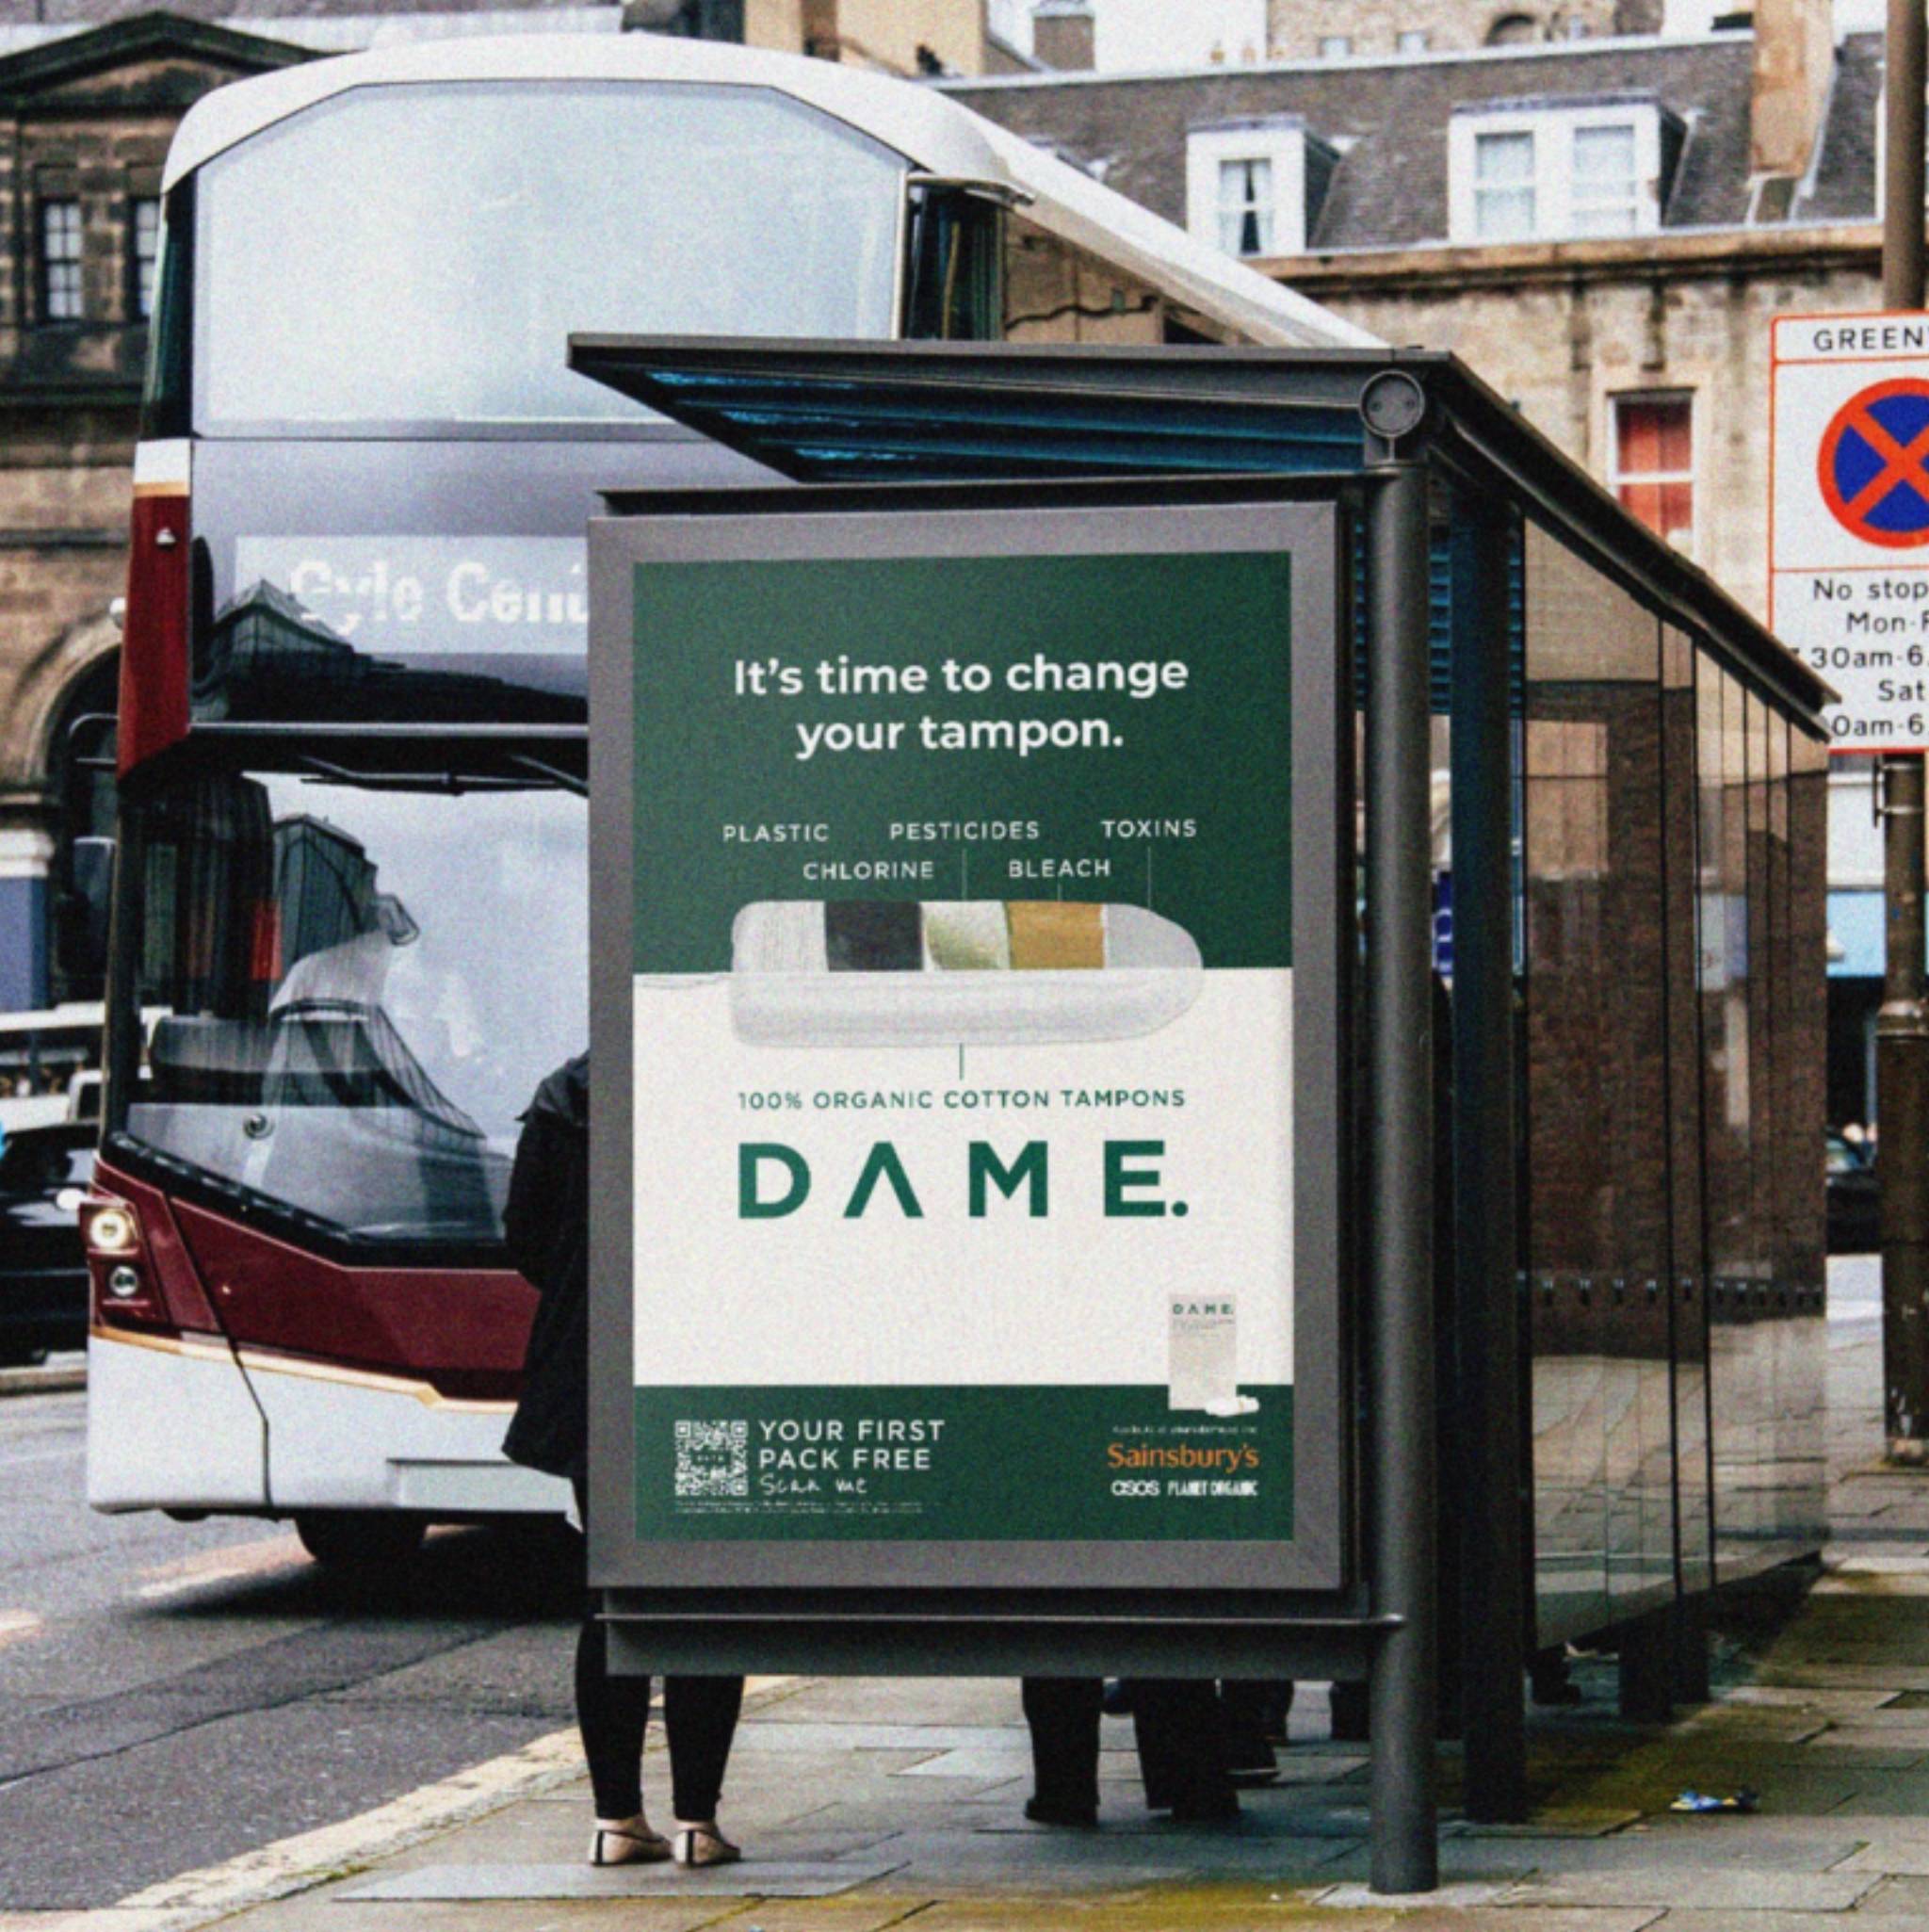 DAME provides transparency with tampon campaign